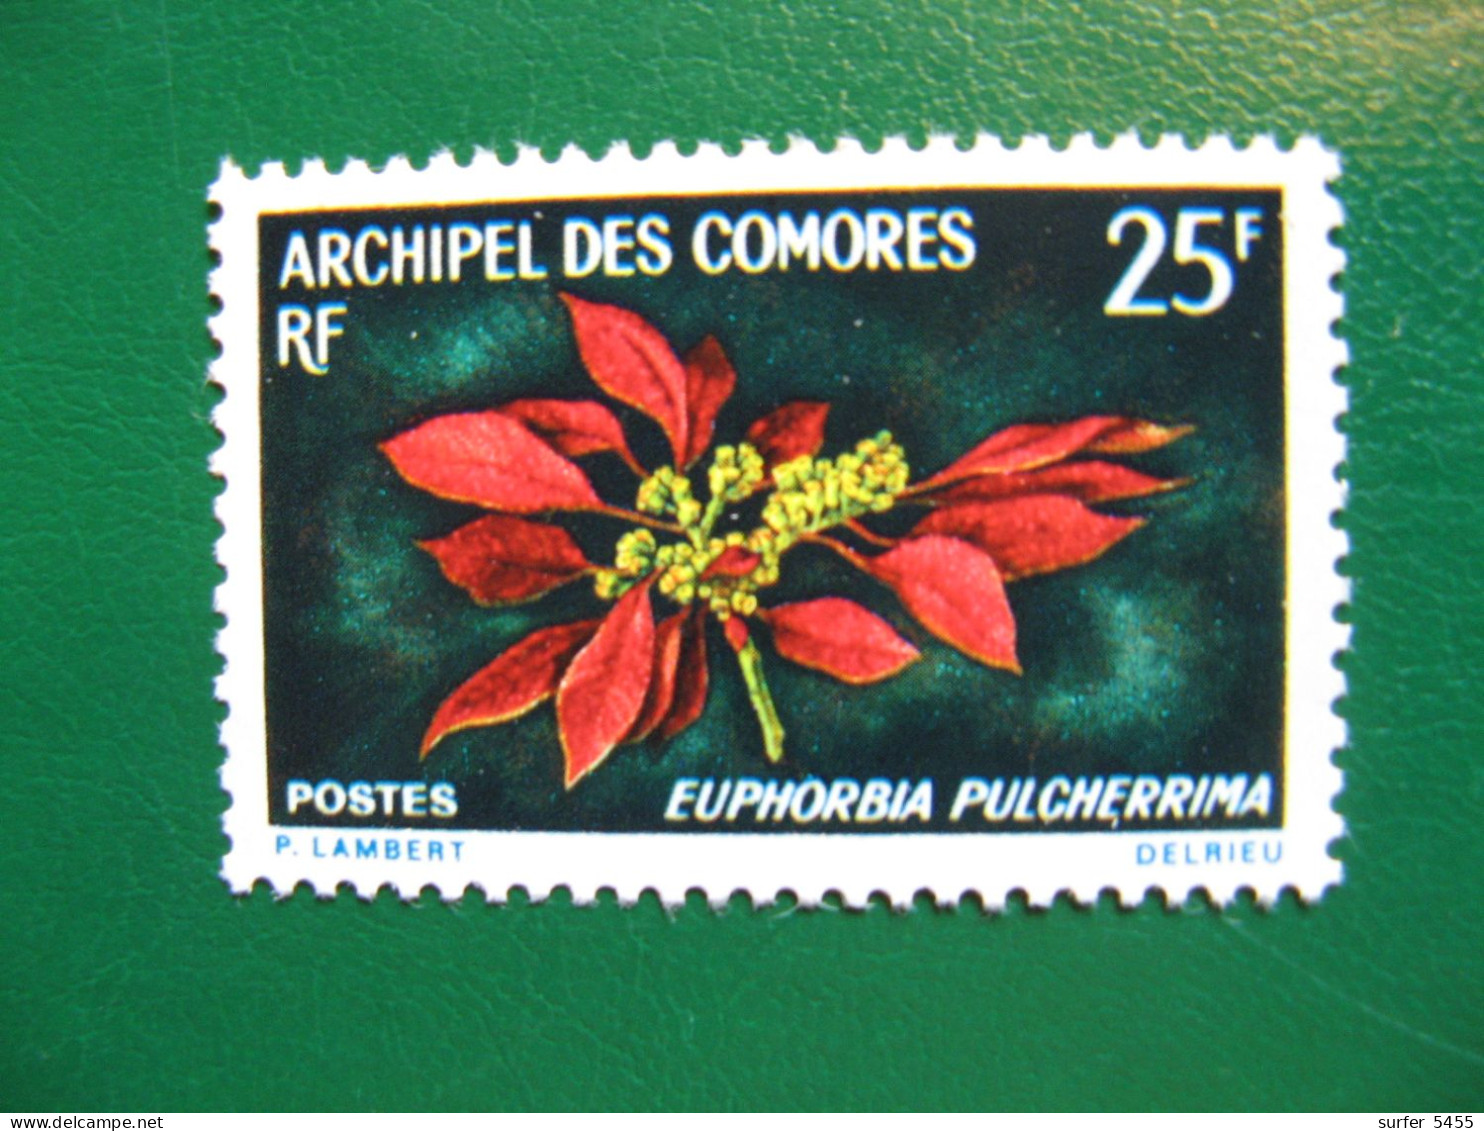 COMORES YVERT POSTE ORDINAIRE N° 56 TIMBRE NEUF** LUXE COTE 4,50 EUROS - Unused Stamps